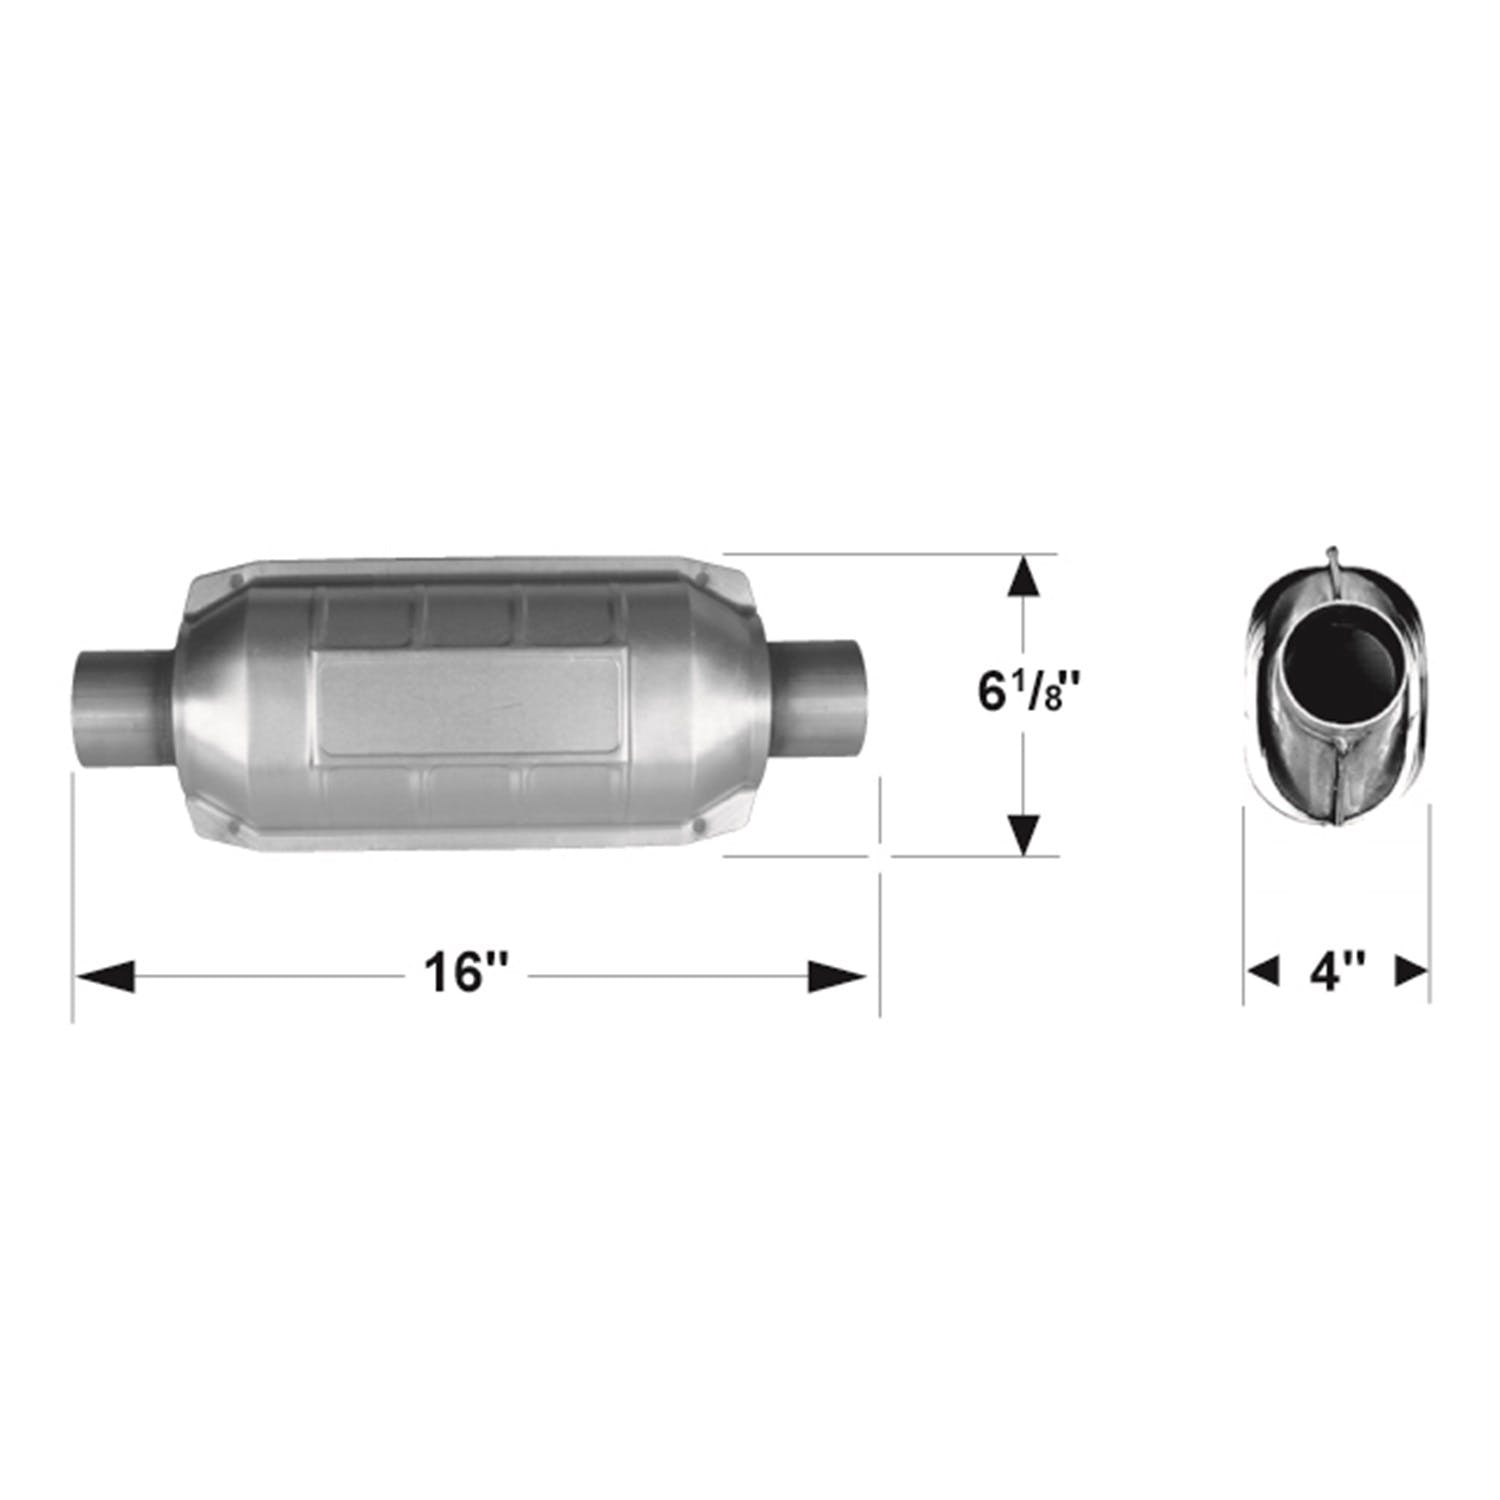 Flowmaster Catalytic Converters 2250220 Catalytic Converter-Universal-225 Series-2.00 in. Inlet/Outlet-49 State